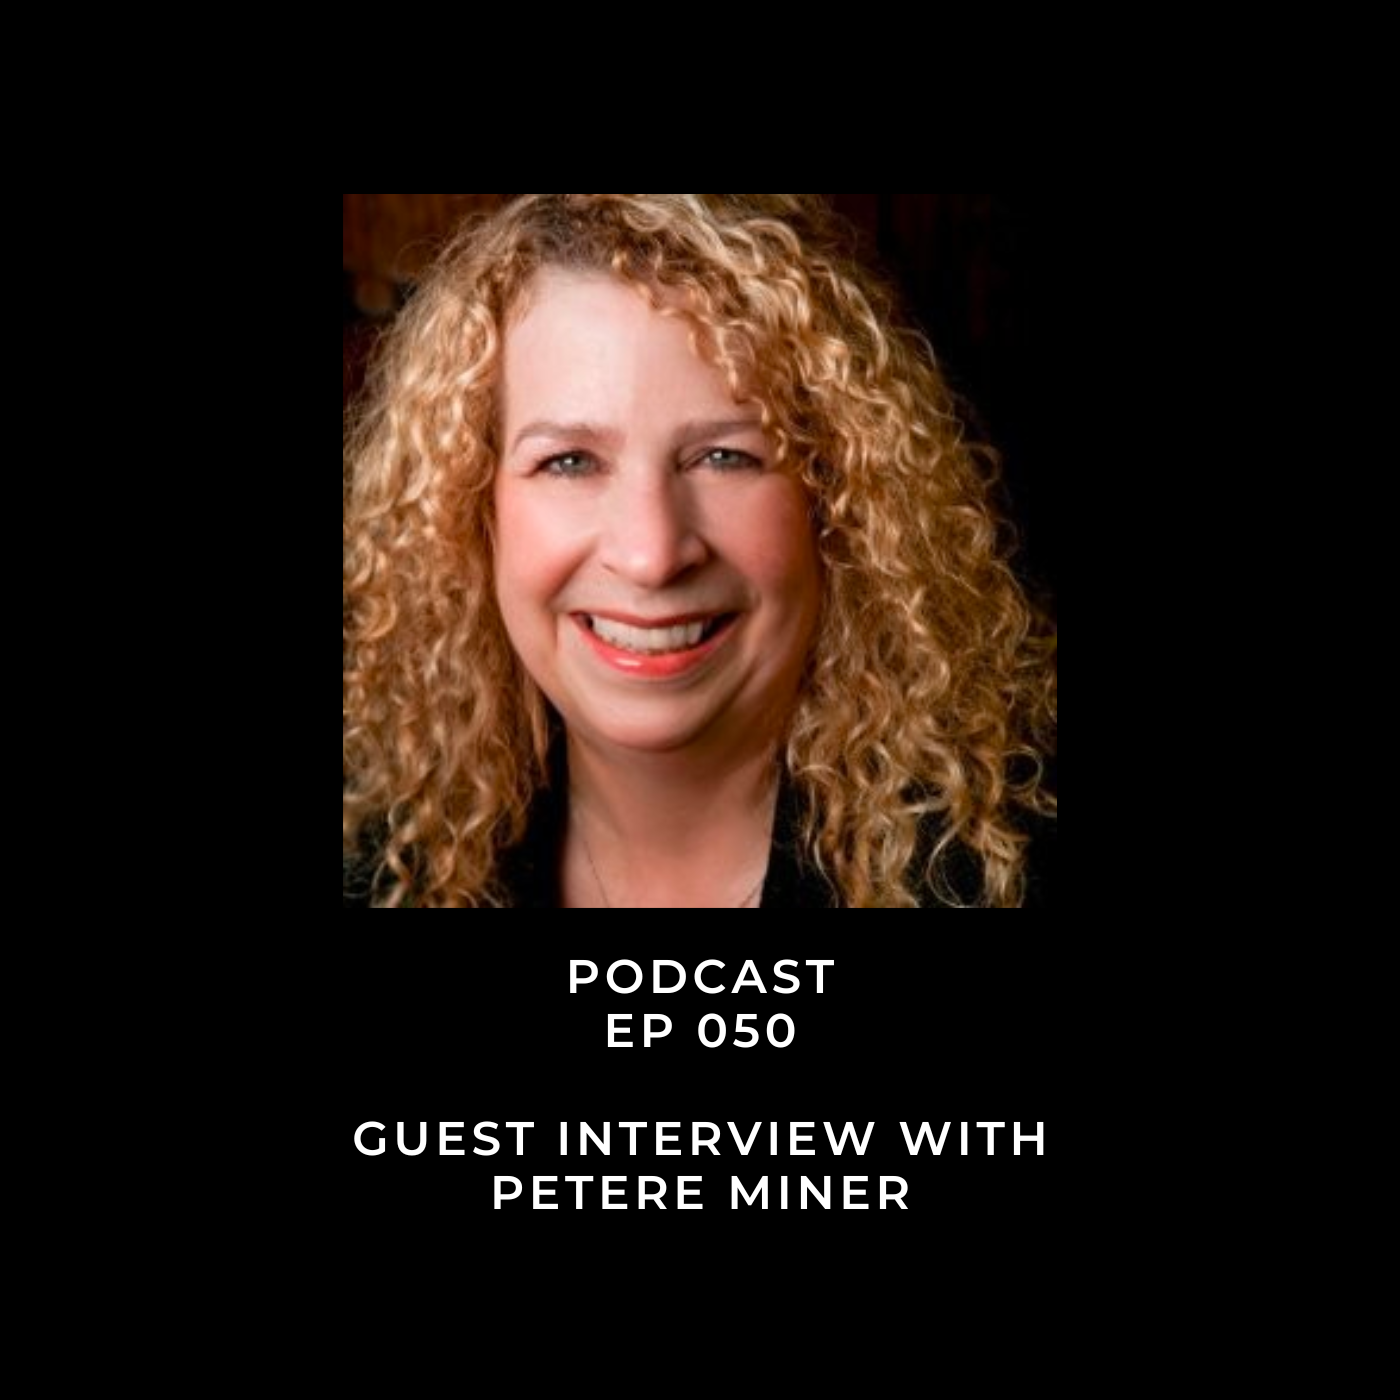 Guest Interview with Petere Miner